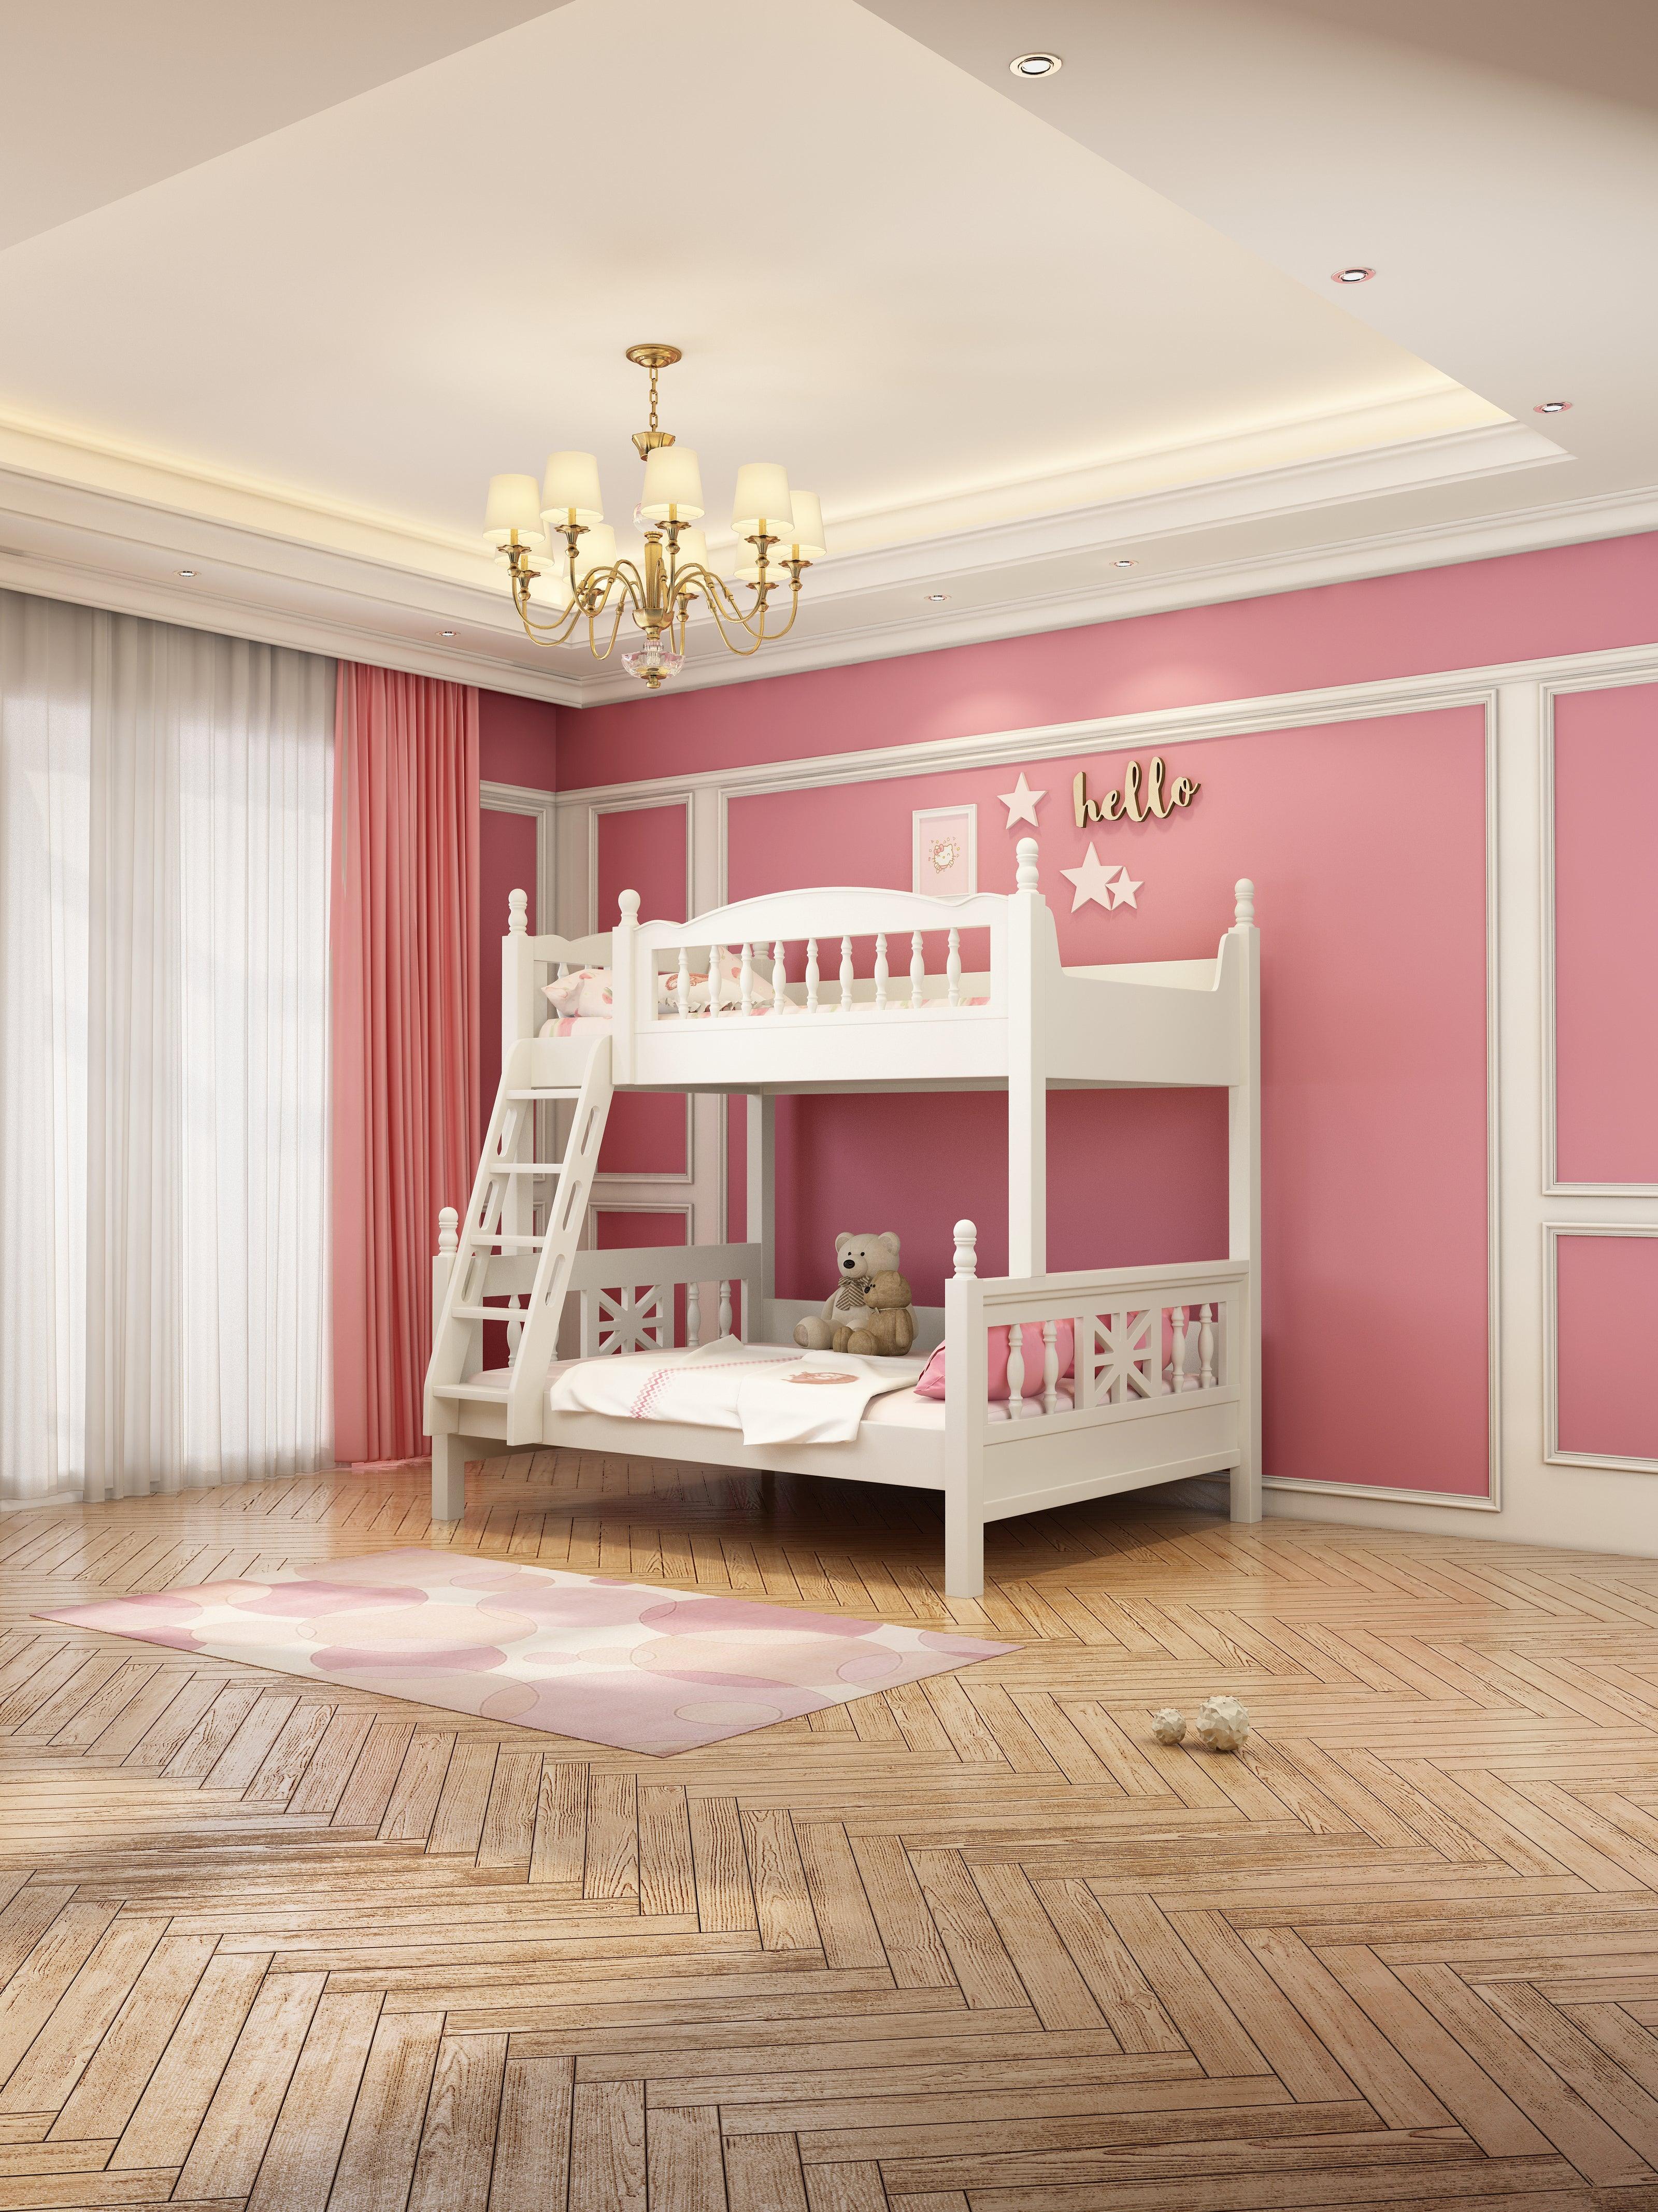 HB Rooms White Bunk Bed (H19) - Kids Haven